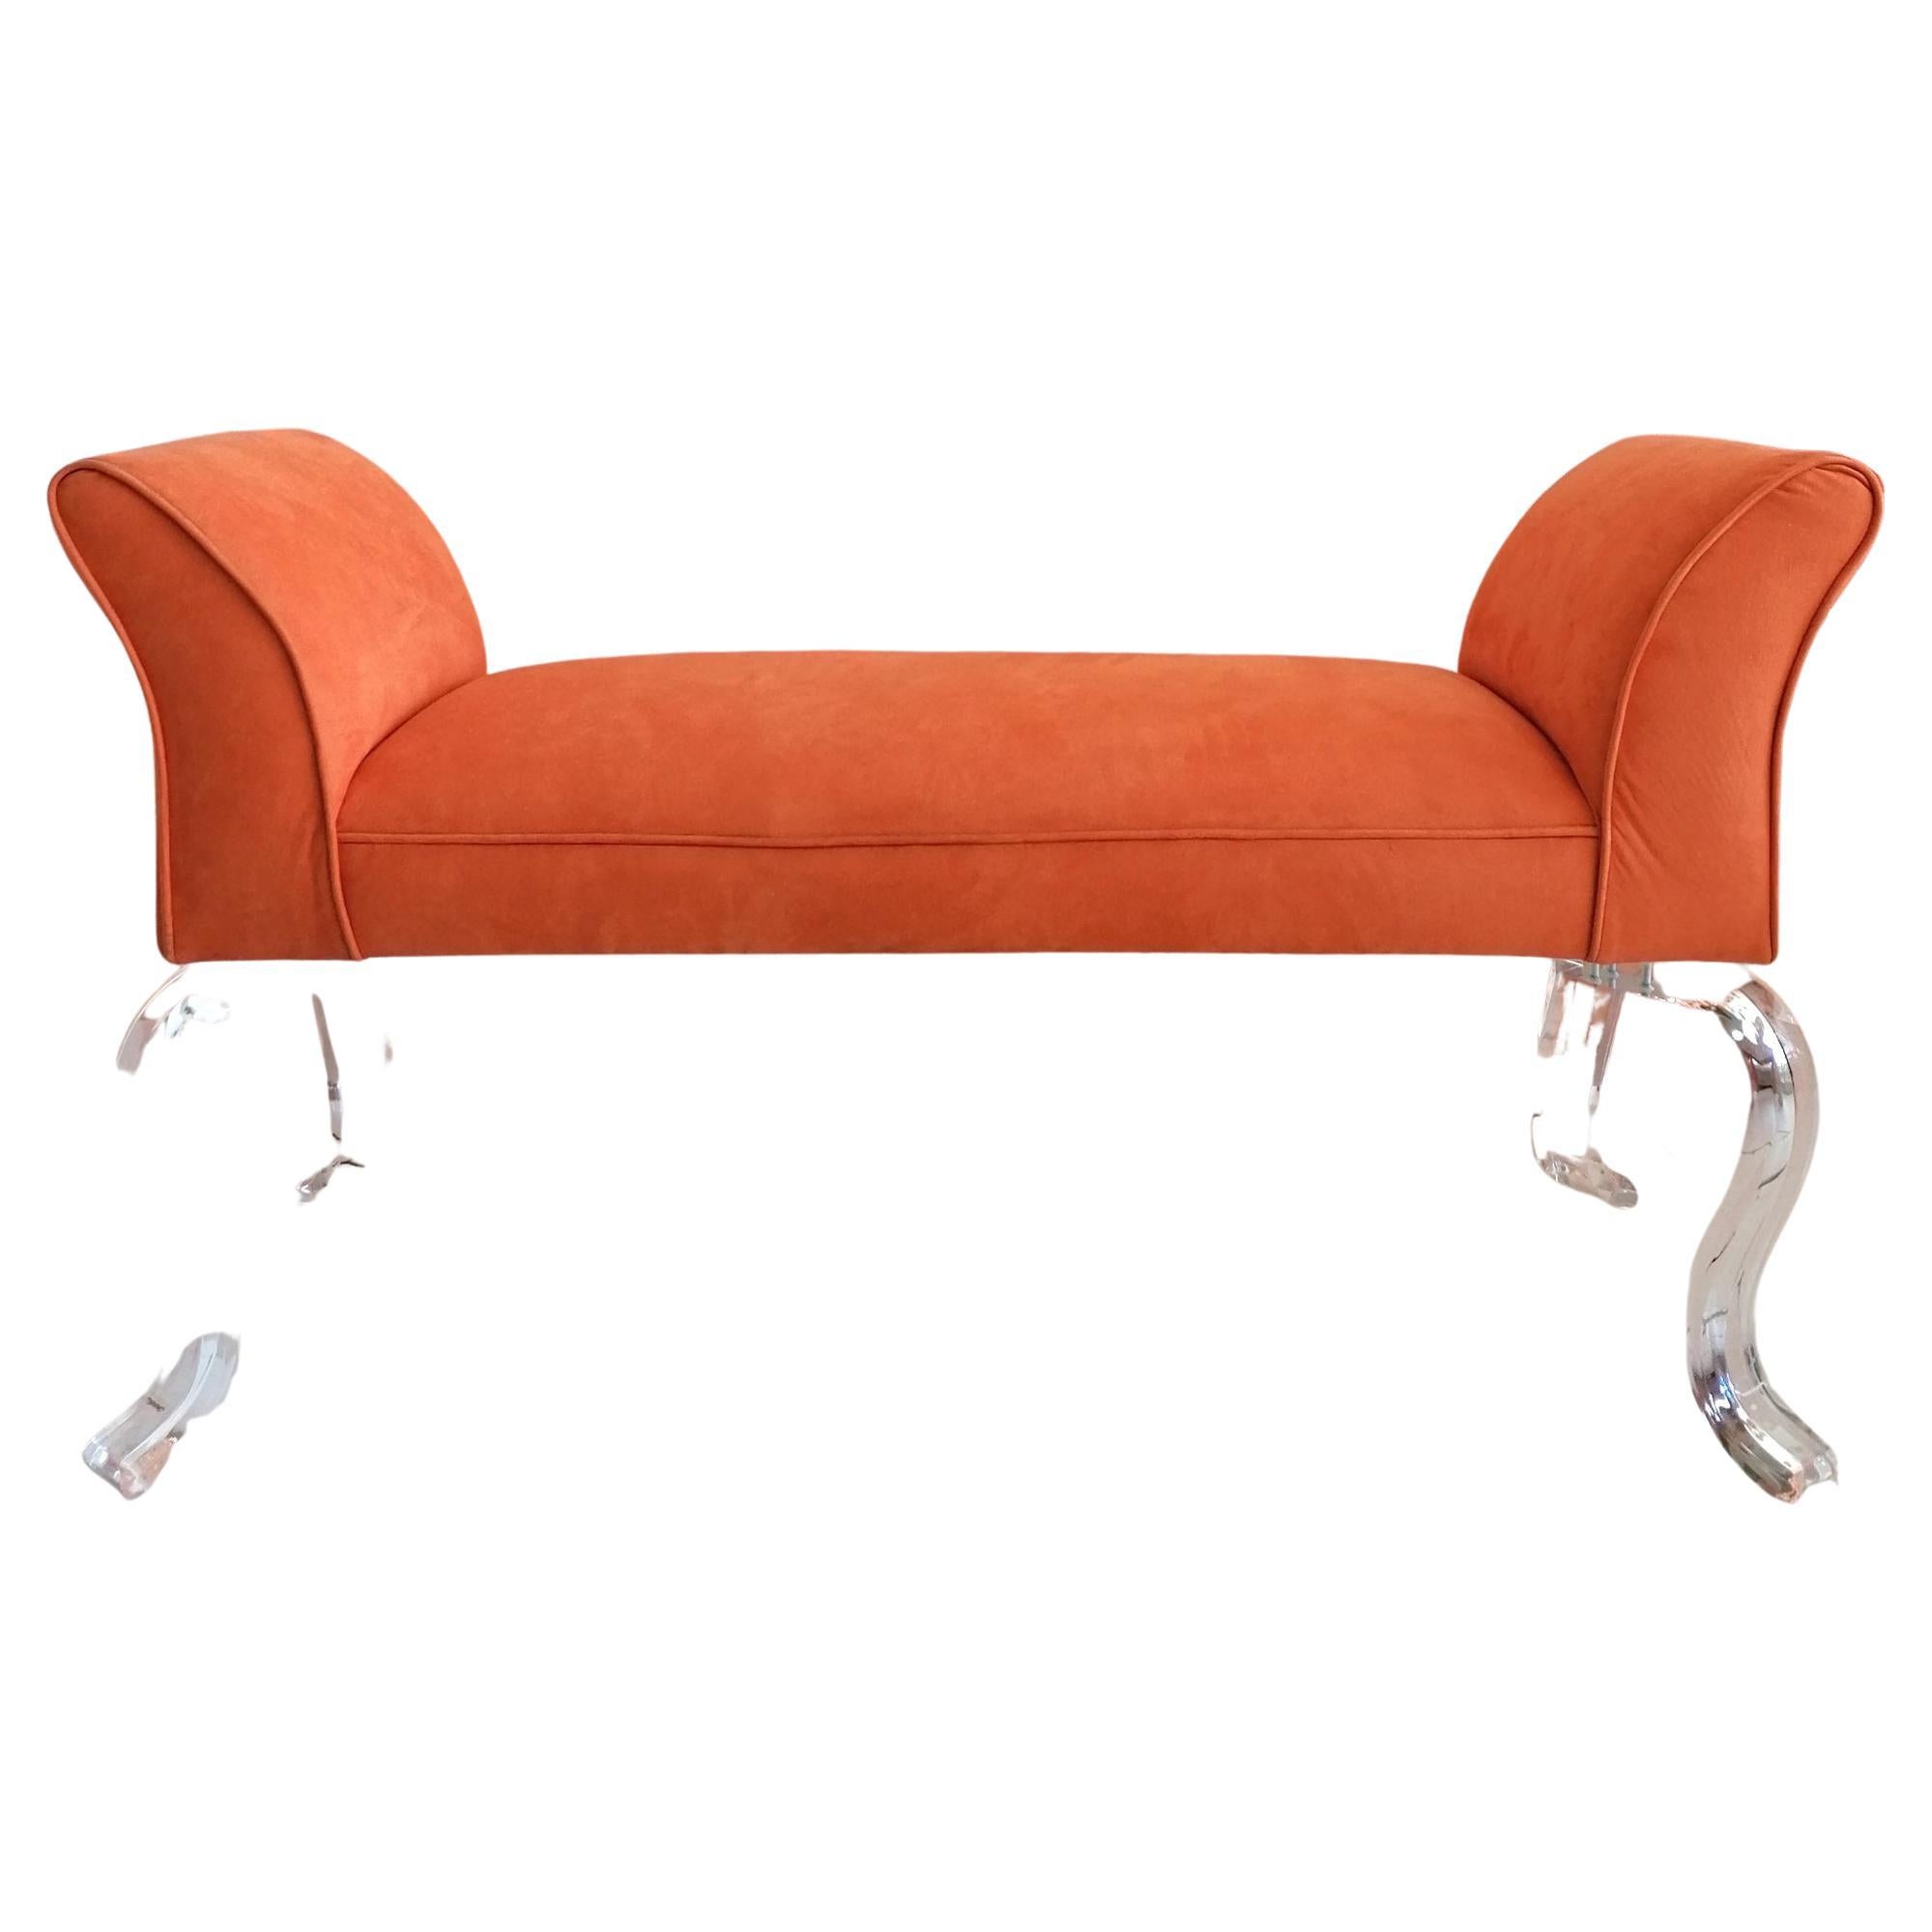 Large Double-Ended Bench with Lucite Curvy Legs, by Shlomi Haziza, USA c1980s For Sale